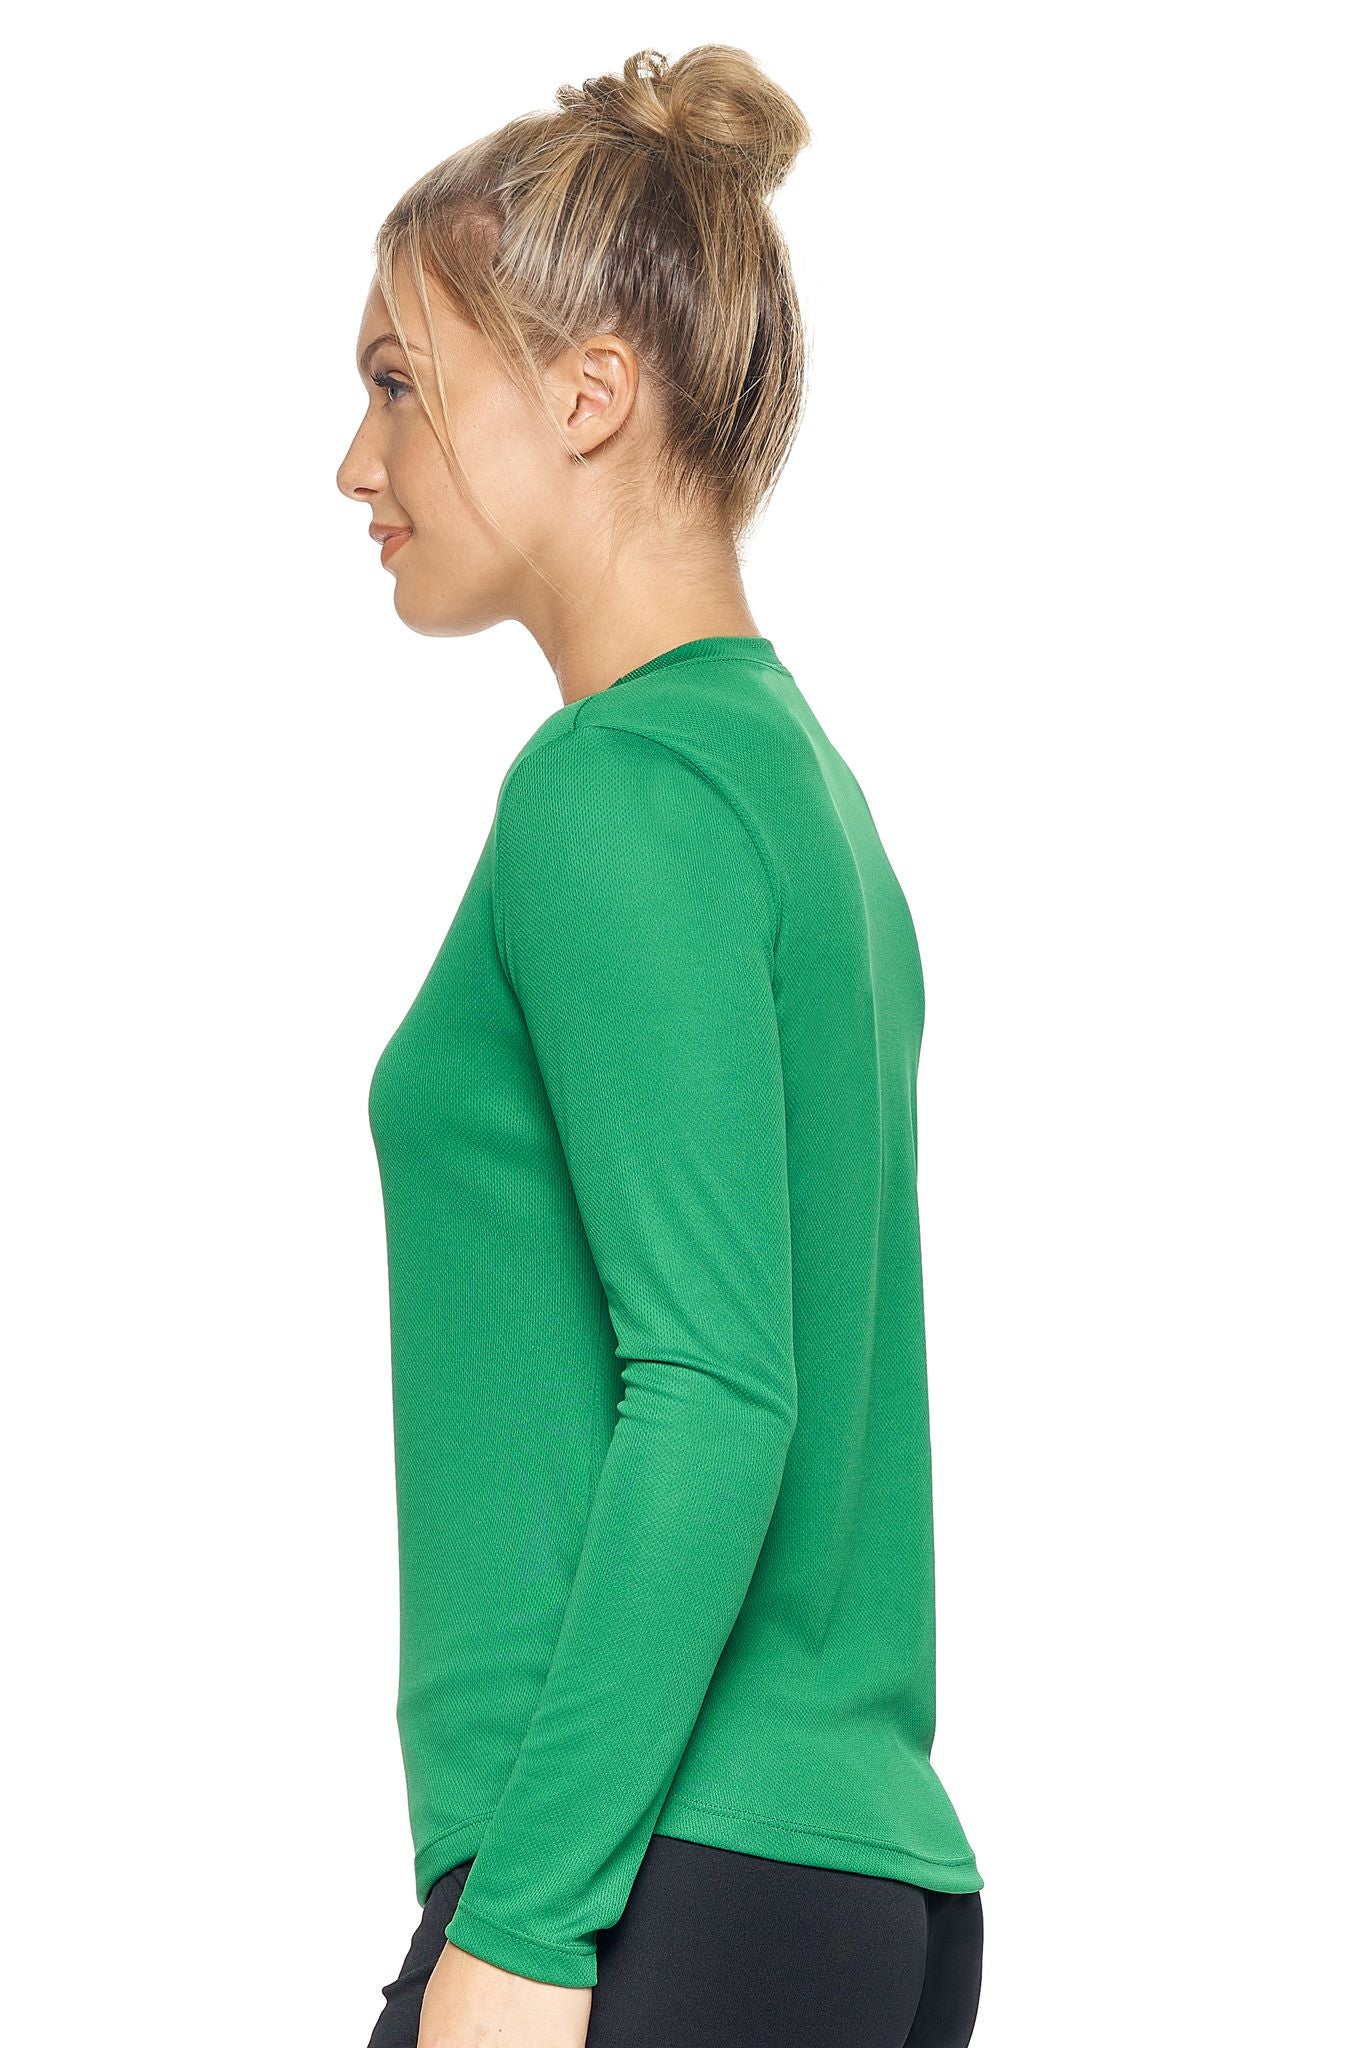 Expert Brand Retail Women's Long Sleeve Crewneck Tec Tee Made in USA Oxymesh kelly green 2#color_kelly-green